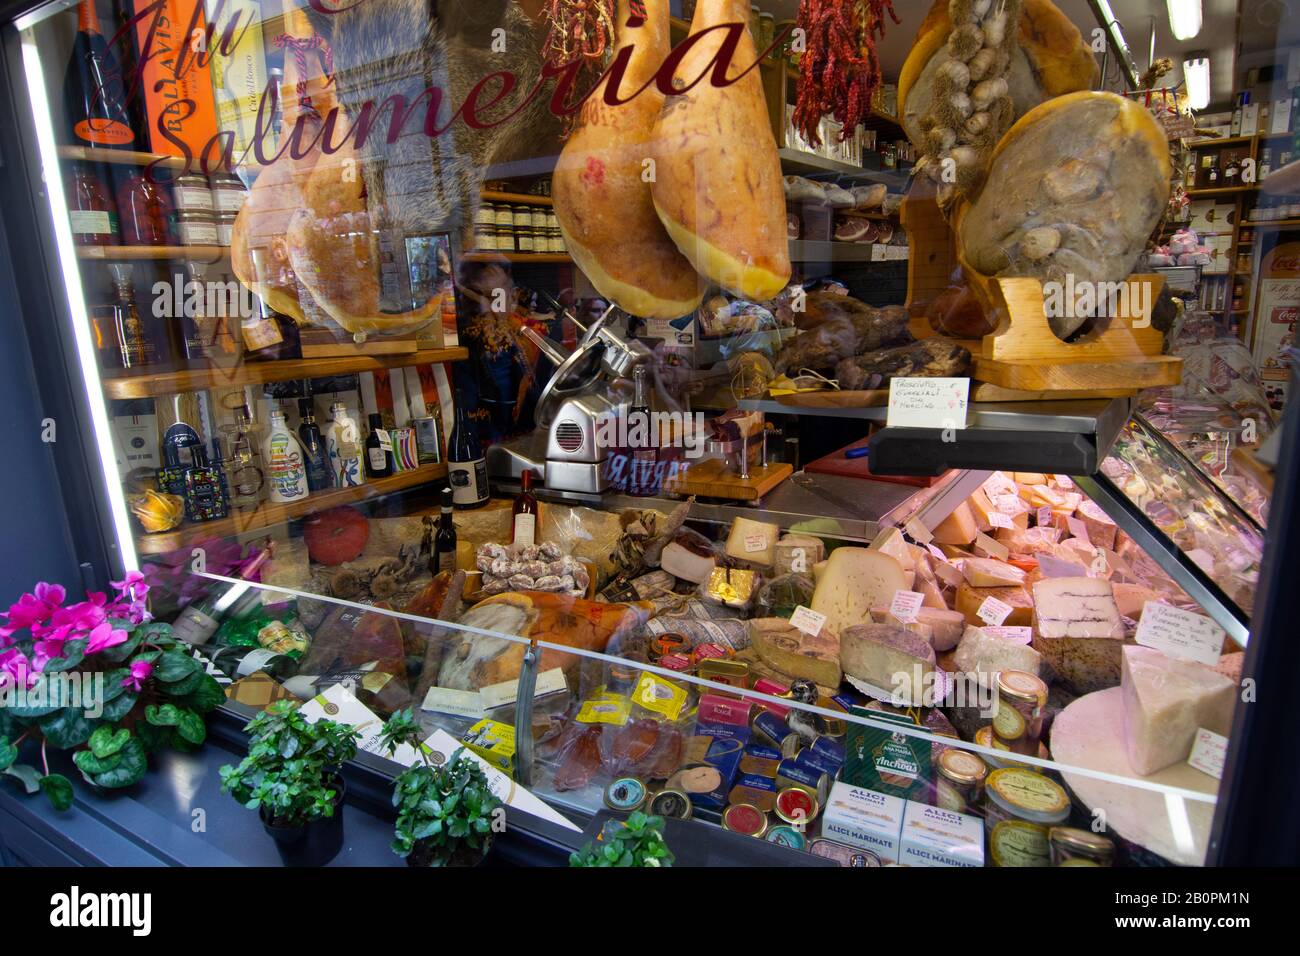 Window view of a Salumeria, shop selling charcuterie meats and cheeses, Rome, Italy Stock Photo